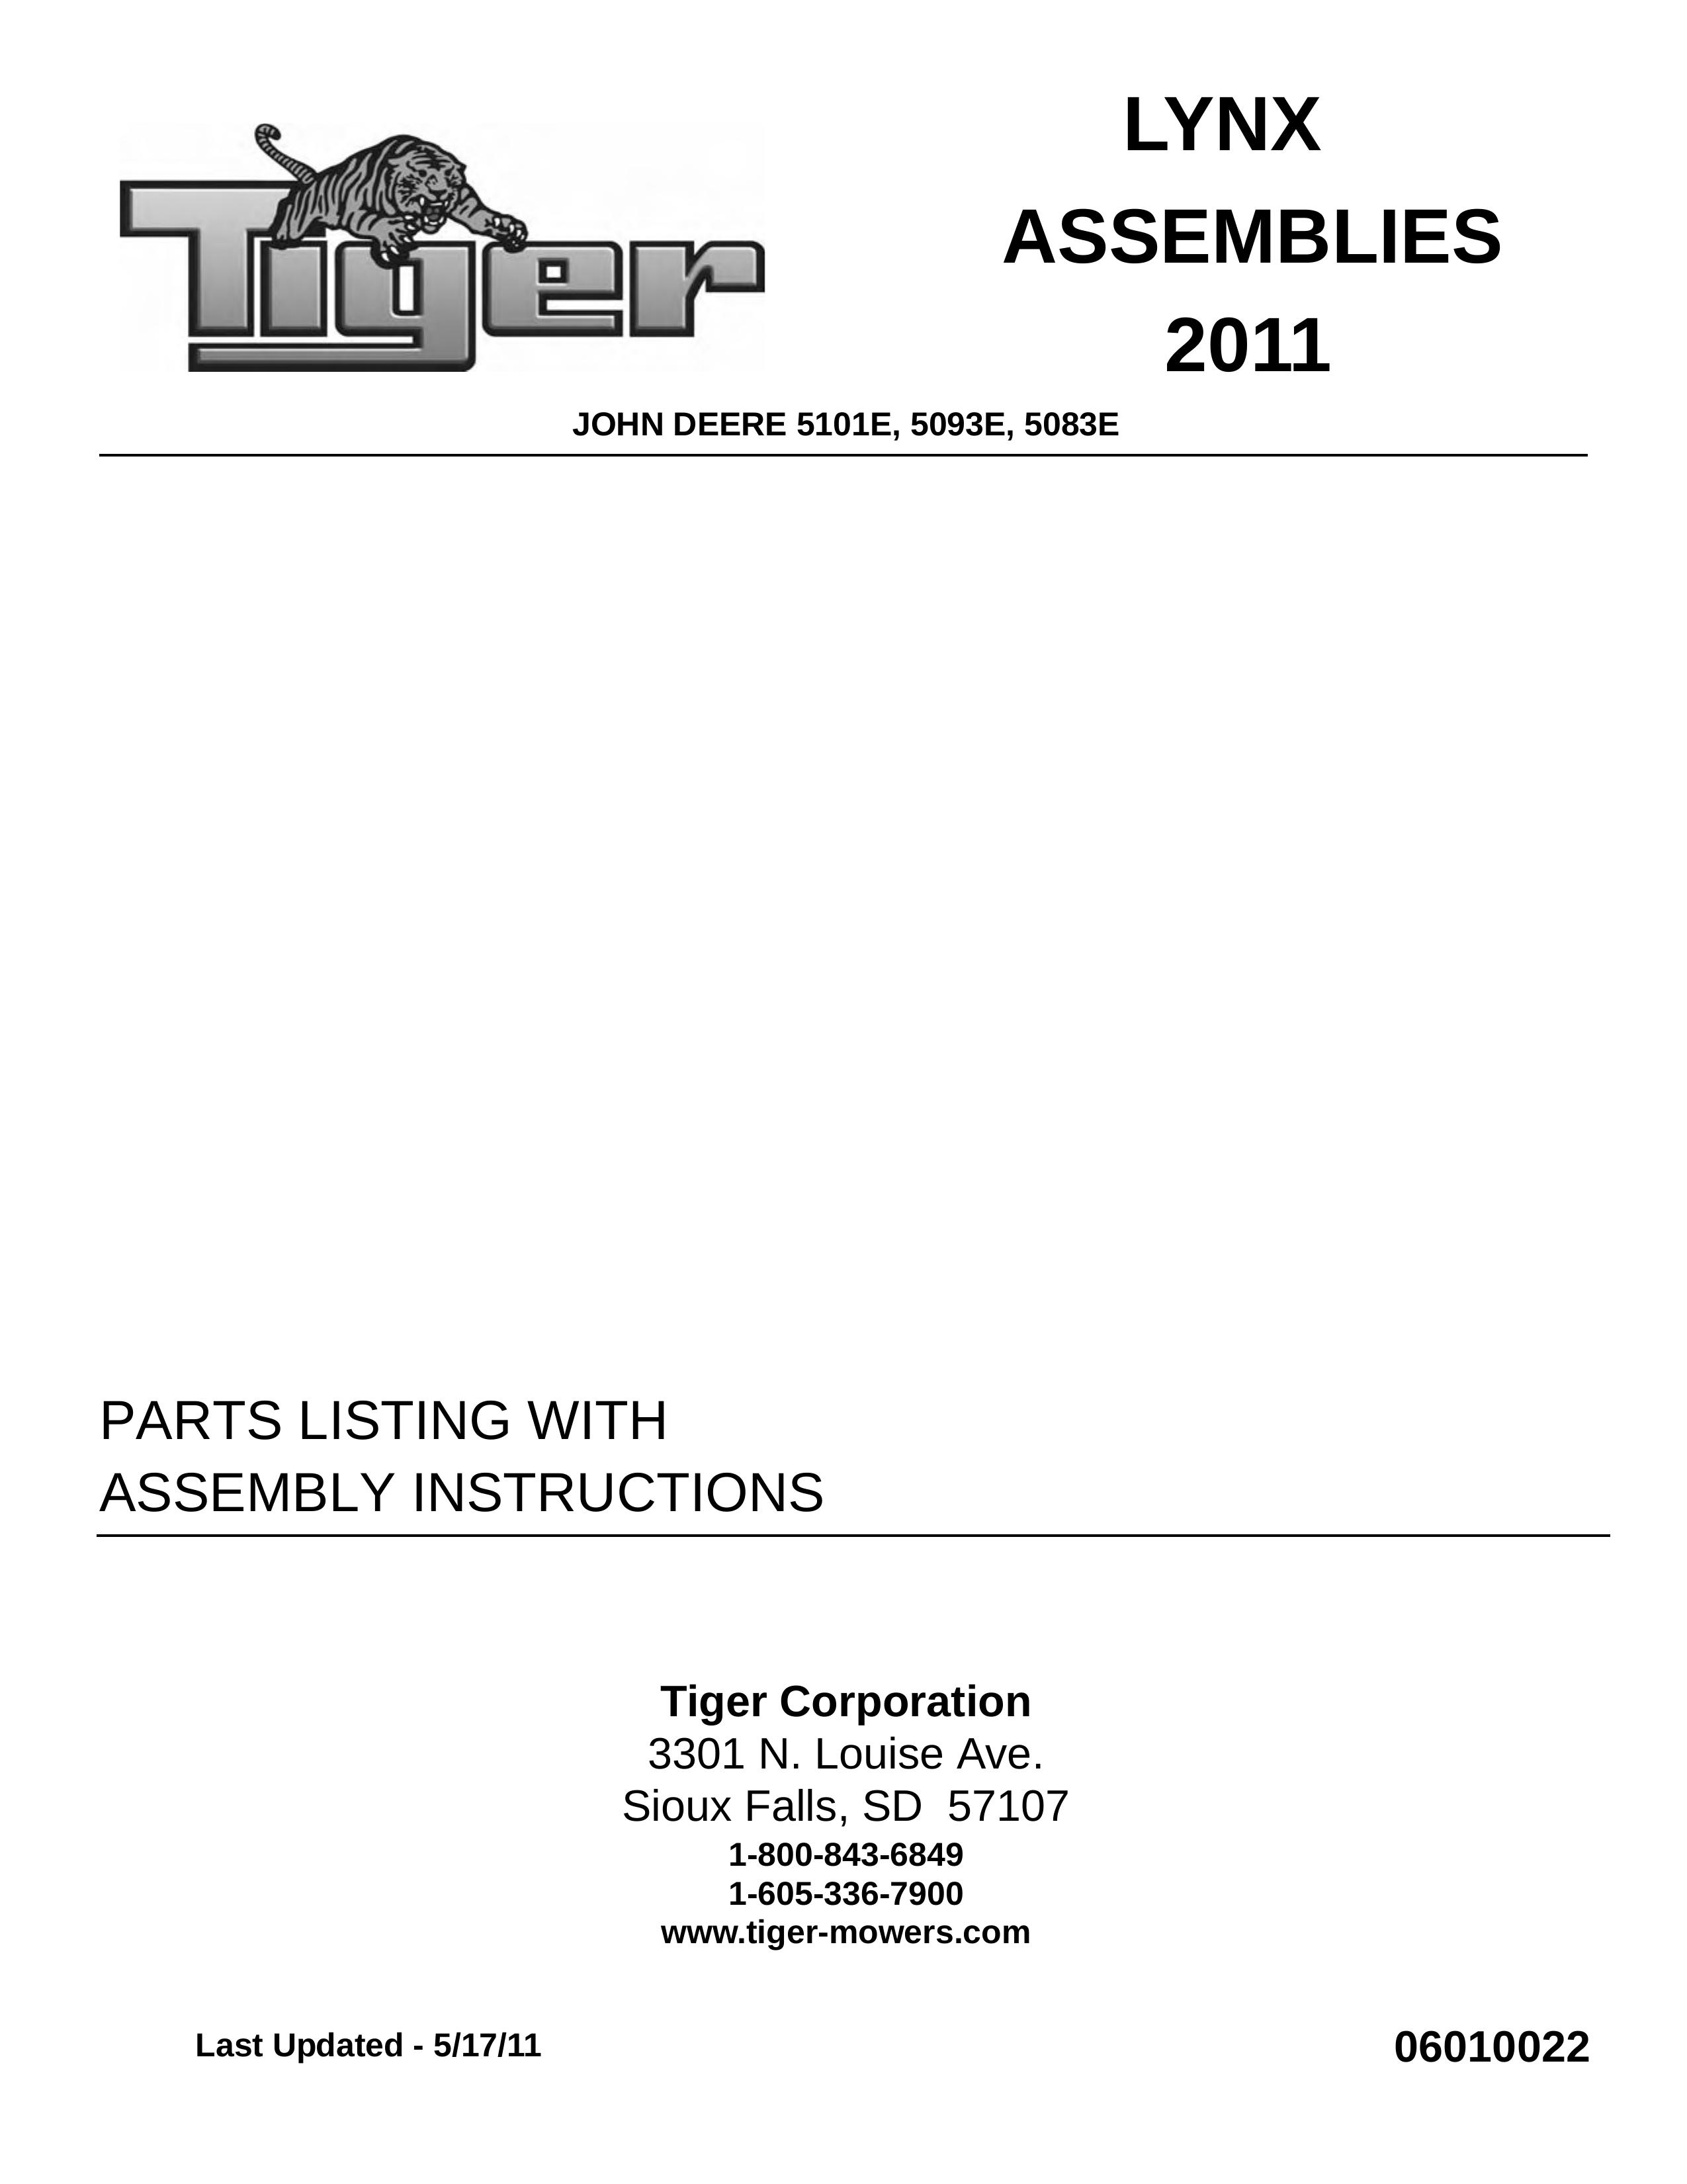 Tiger Products Co., Ltd 5093E Lawn Mower User Manual